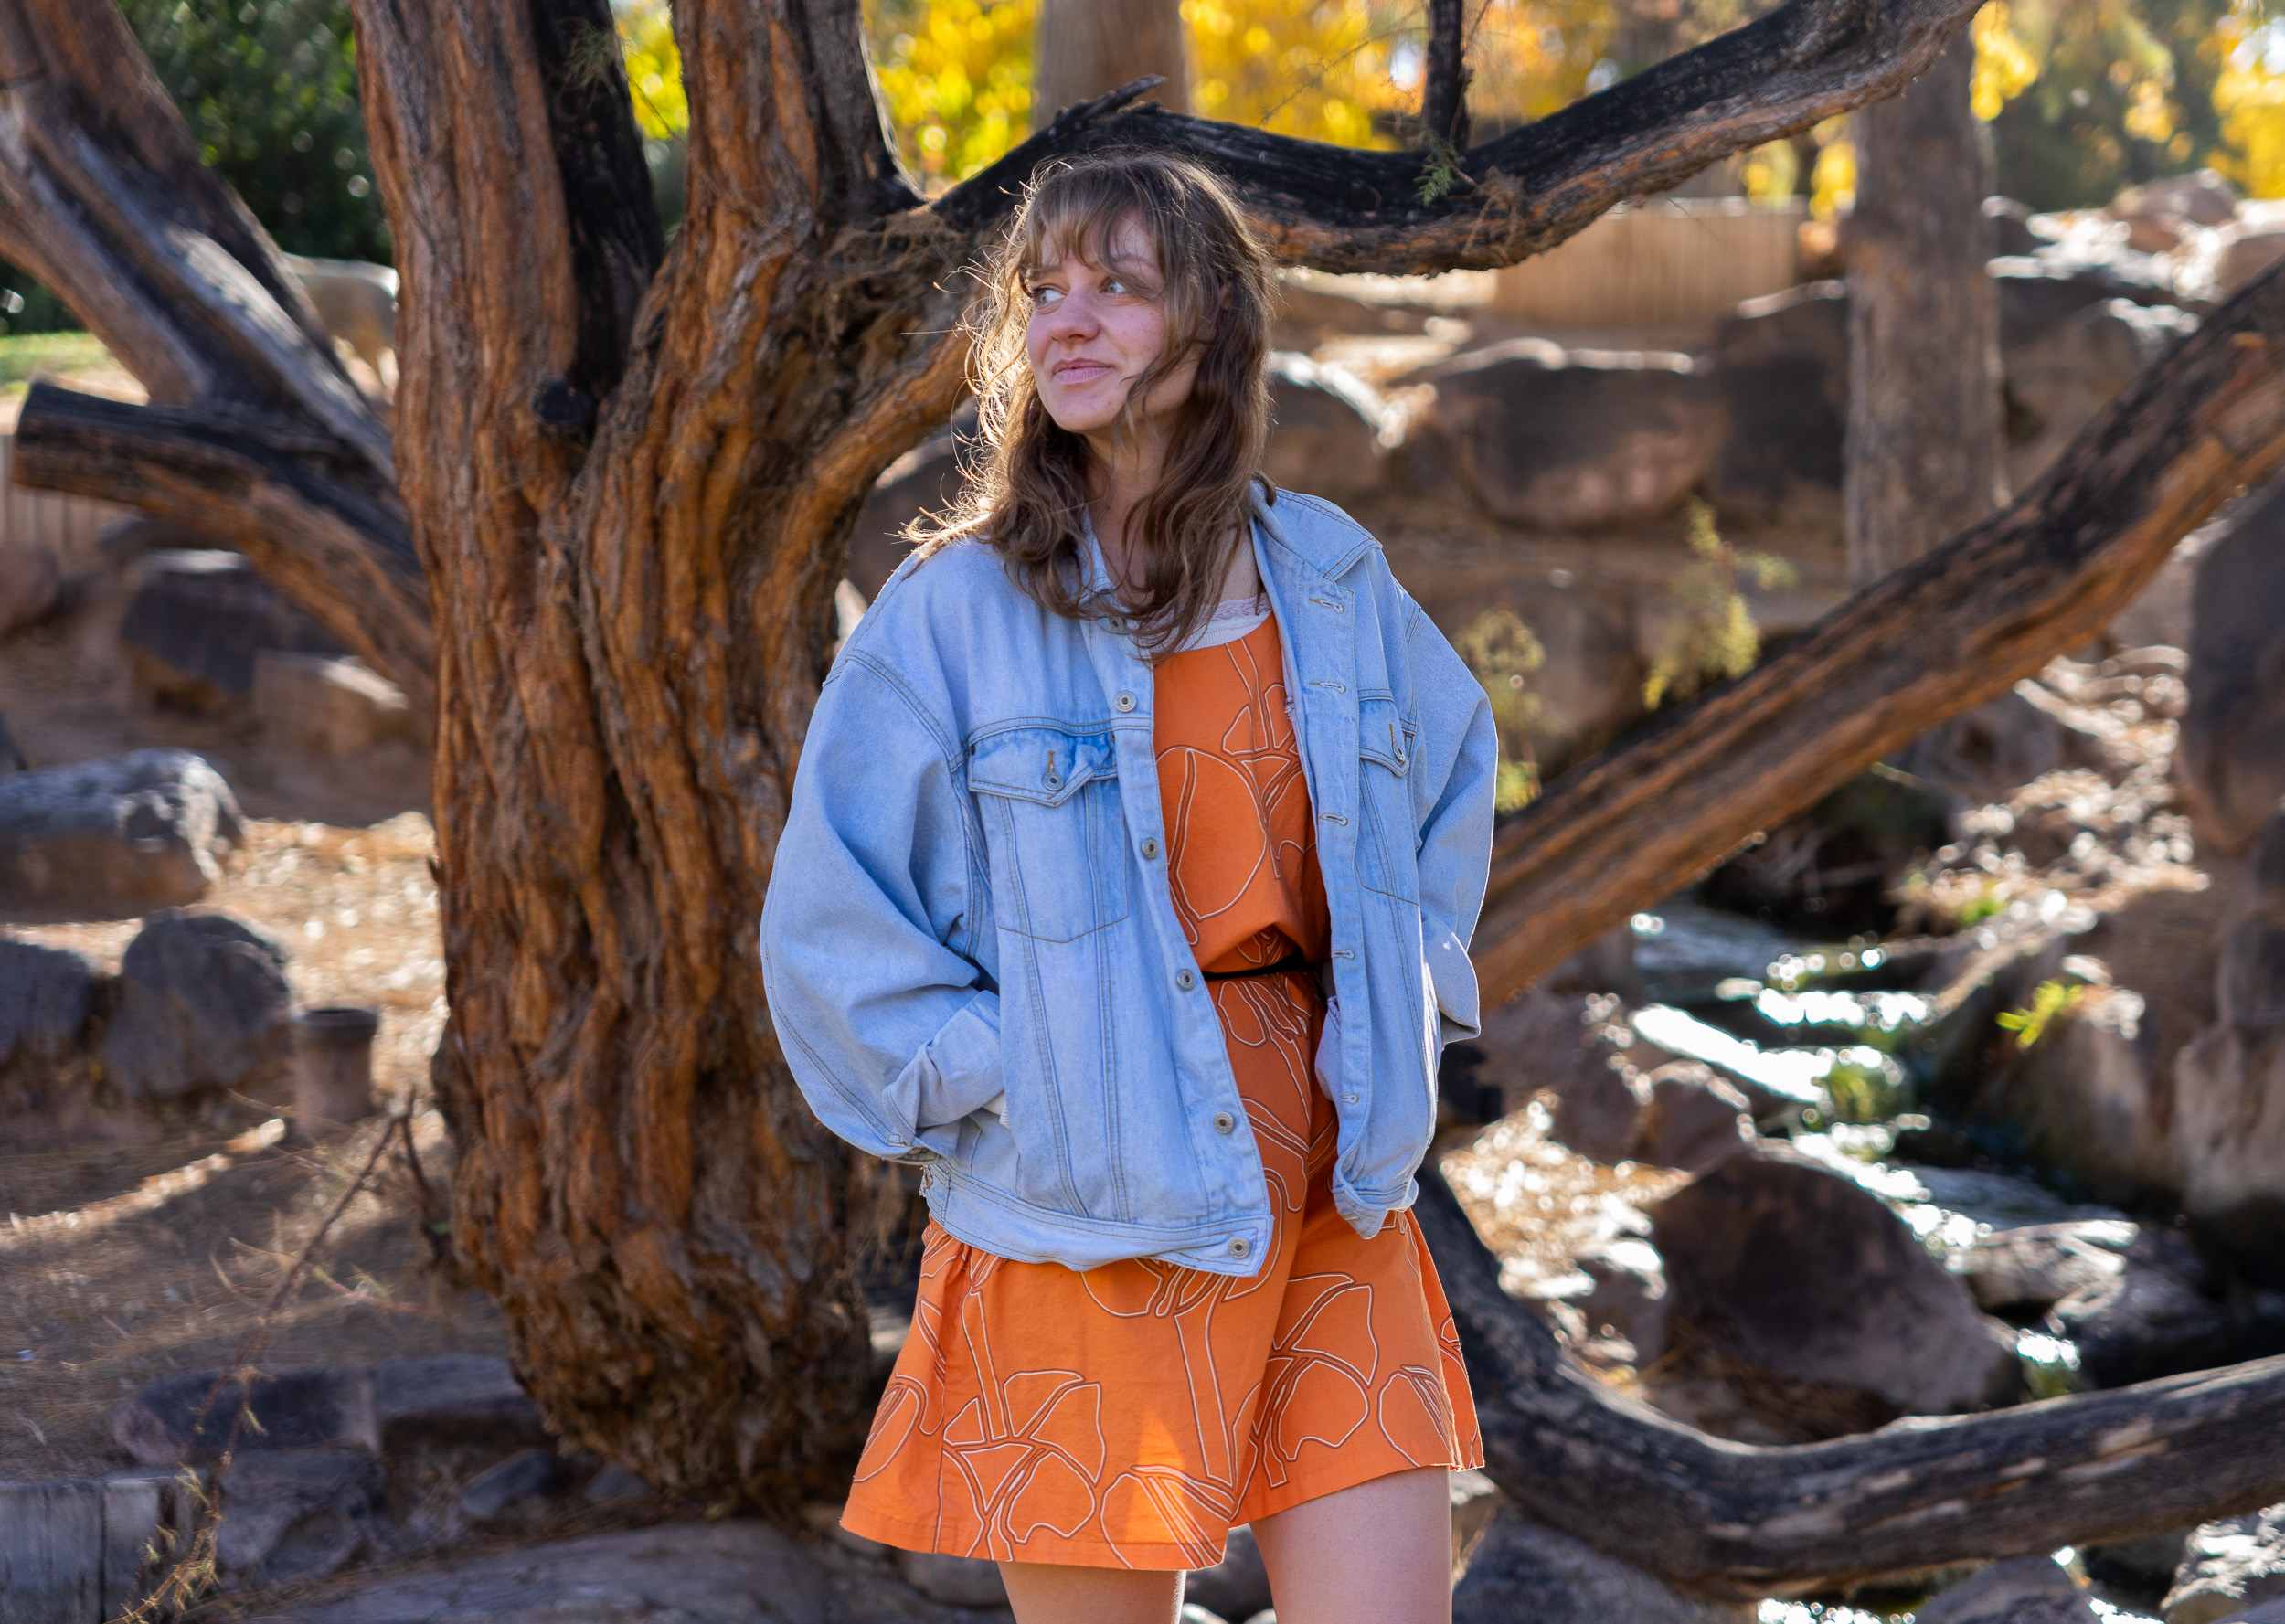 A woman wearing an orange dress and blue jacket stands beneath a tree.